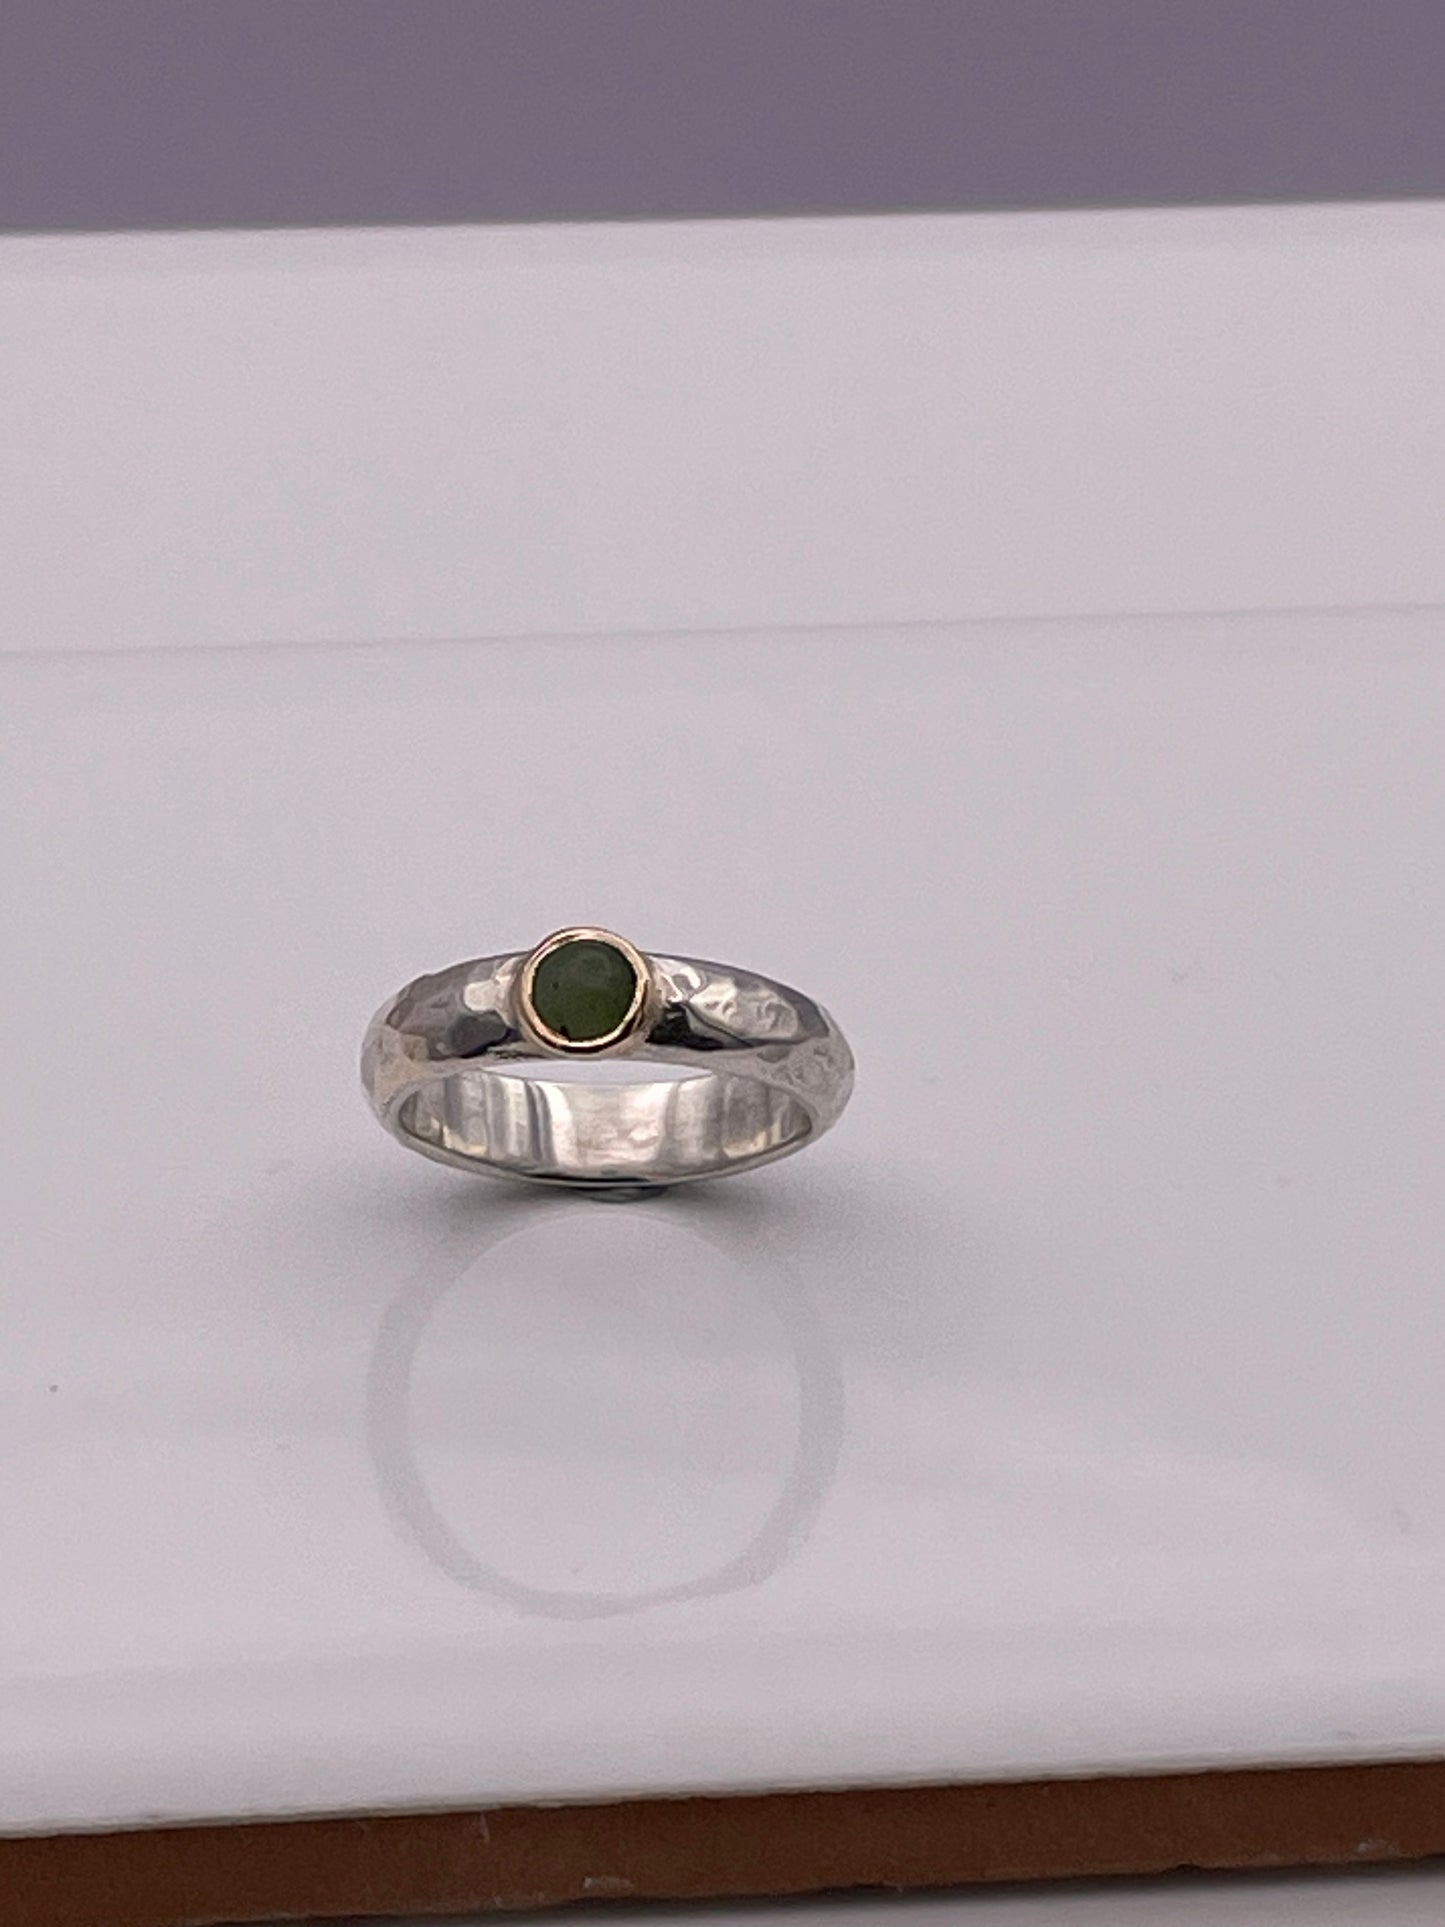 Cabochon Spotted Jade, silver and gold ring